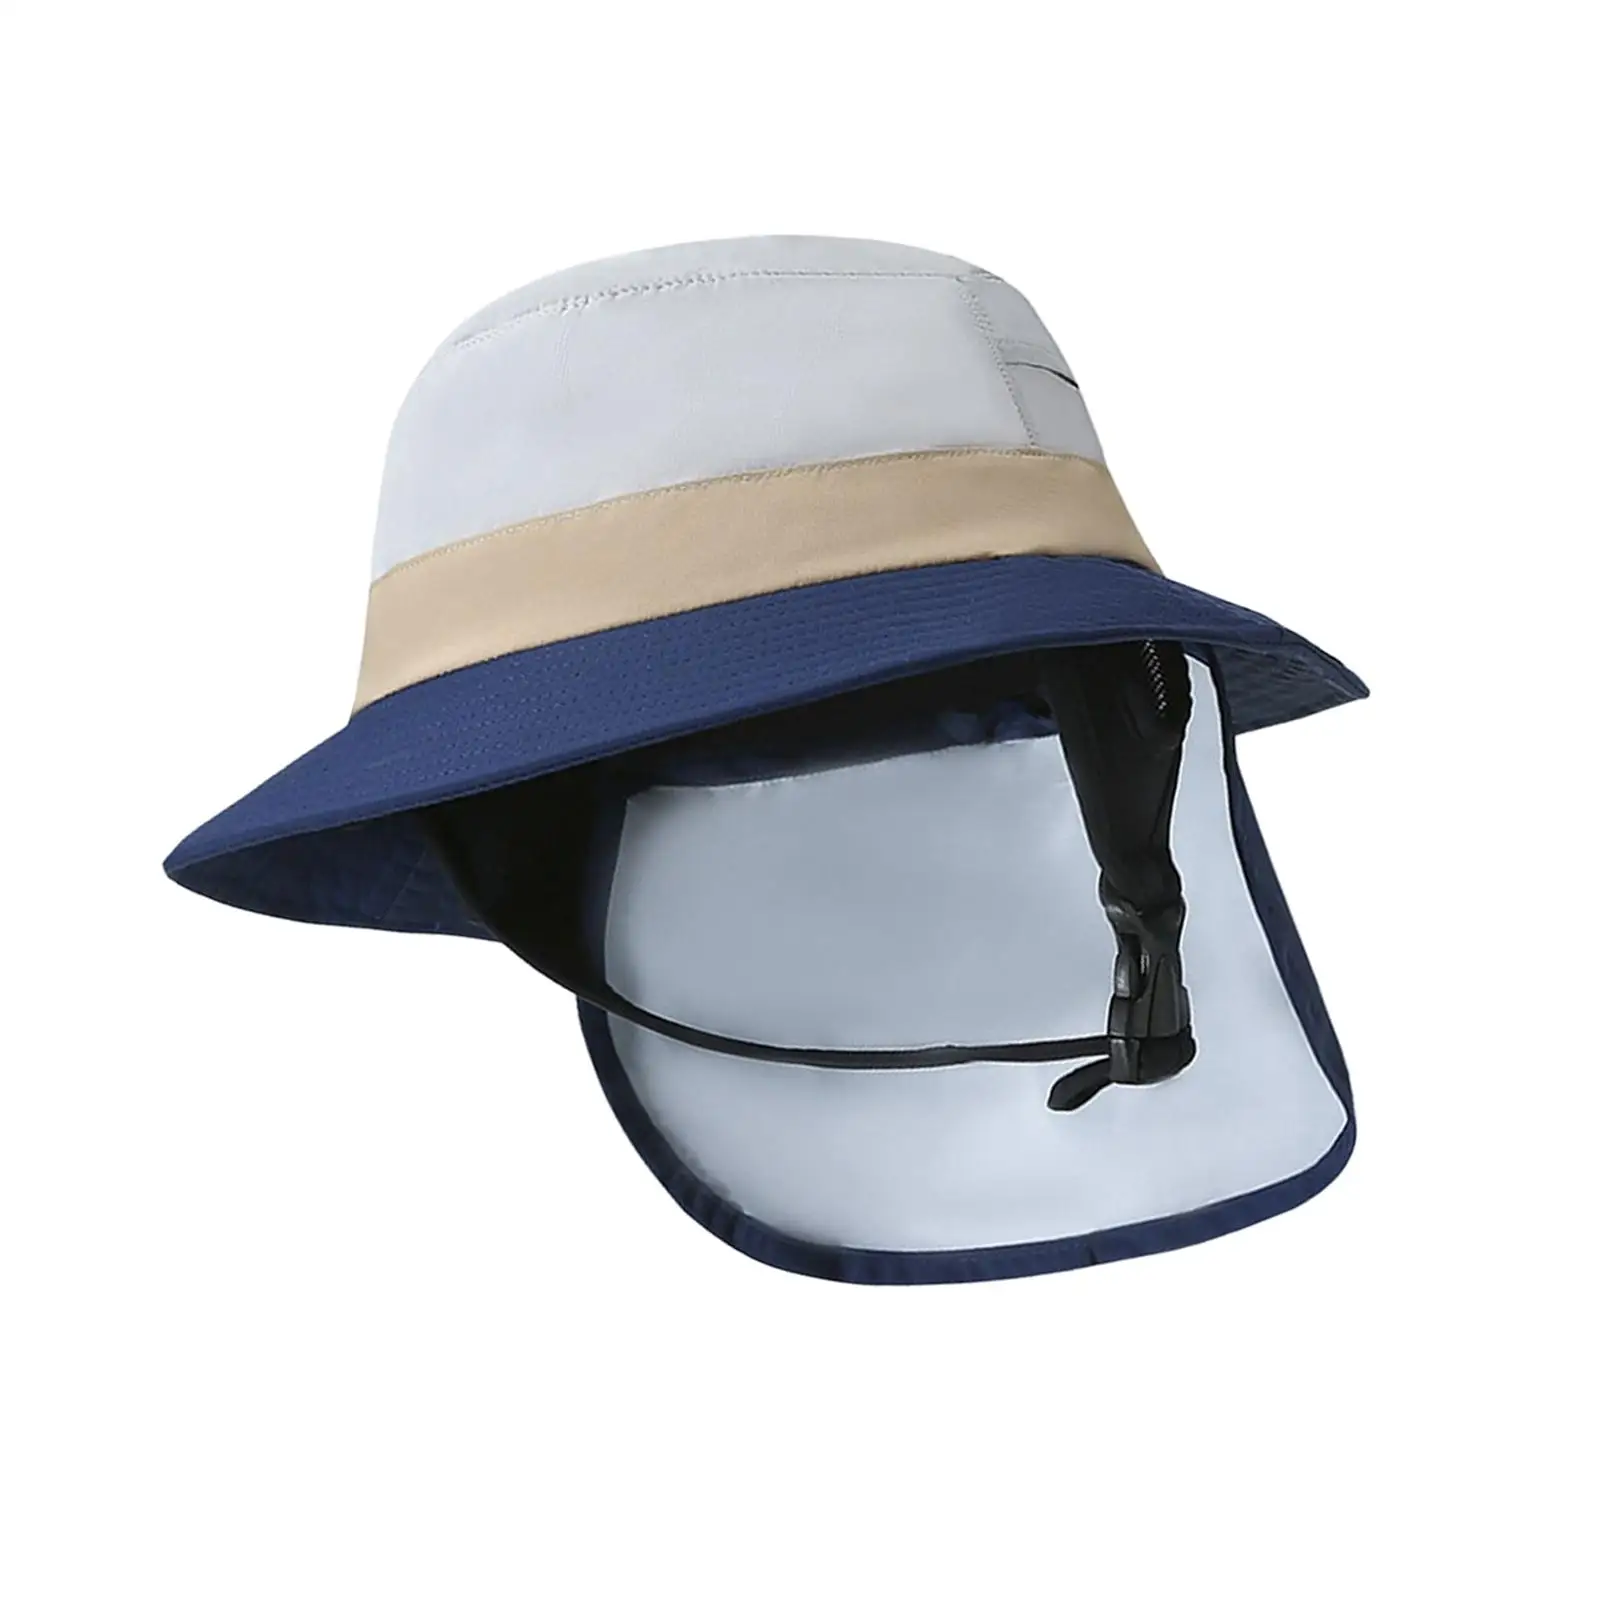 Surf Bucket Hat Protection Wide Brim for Boating Beach Men Women Teens